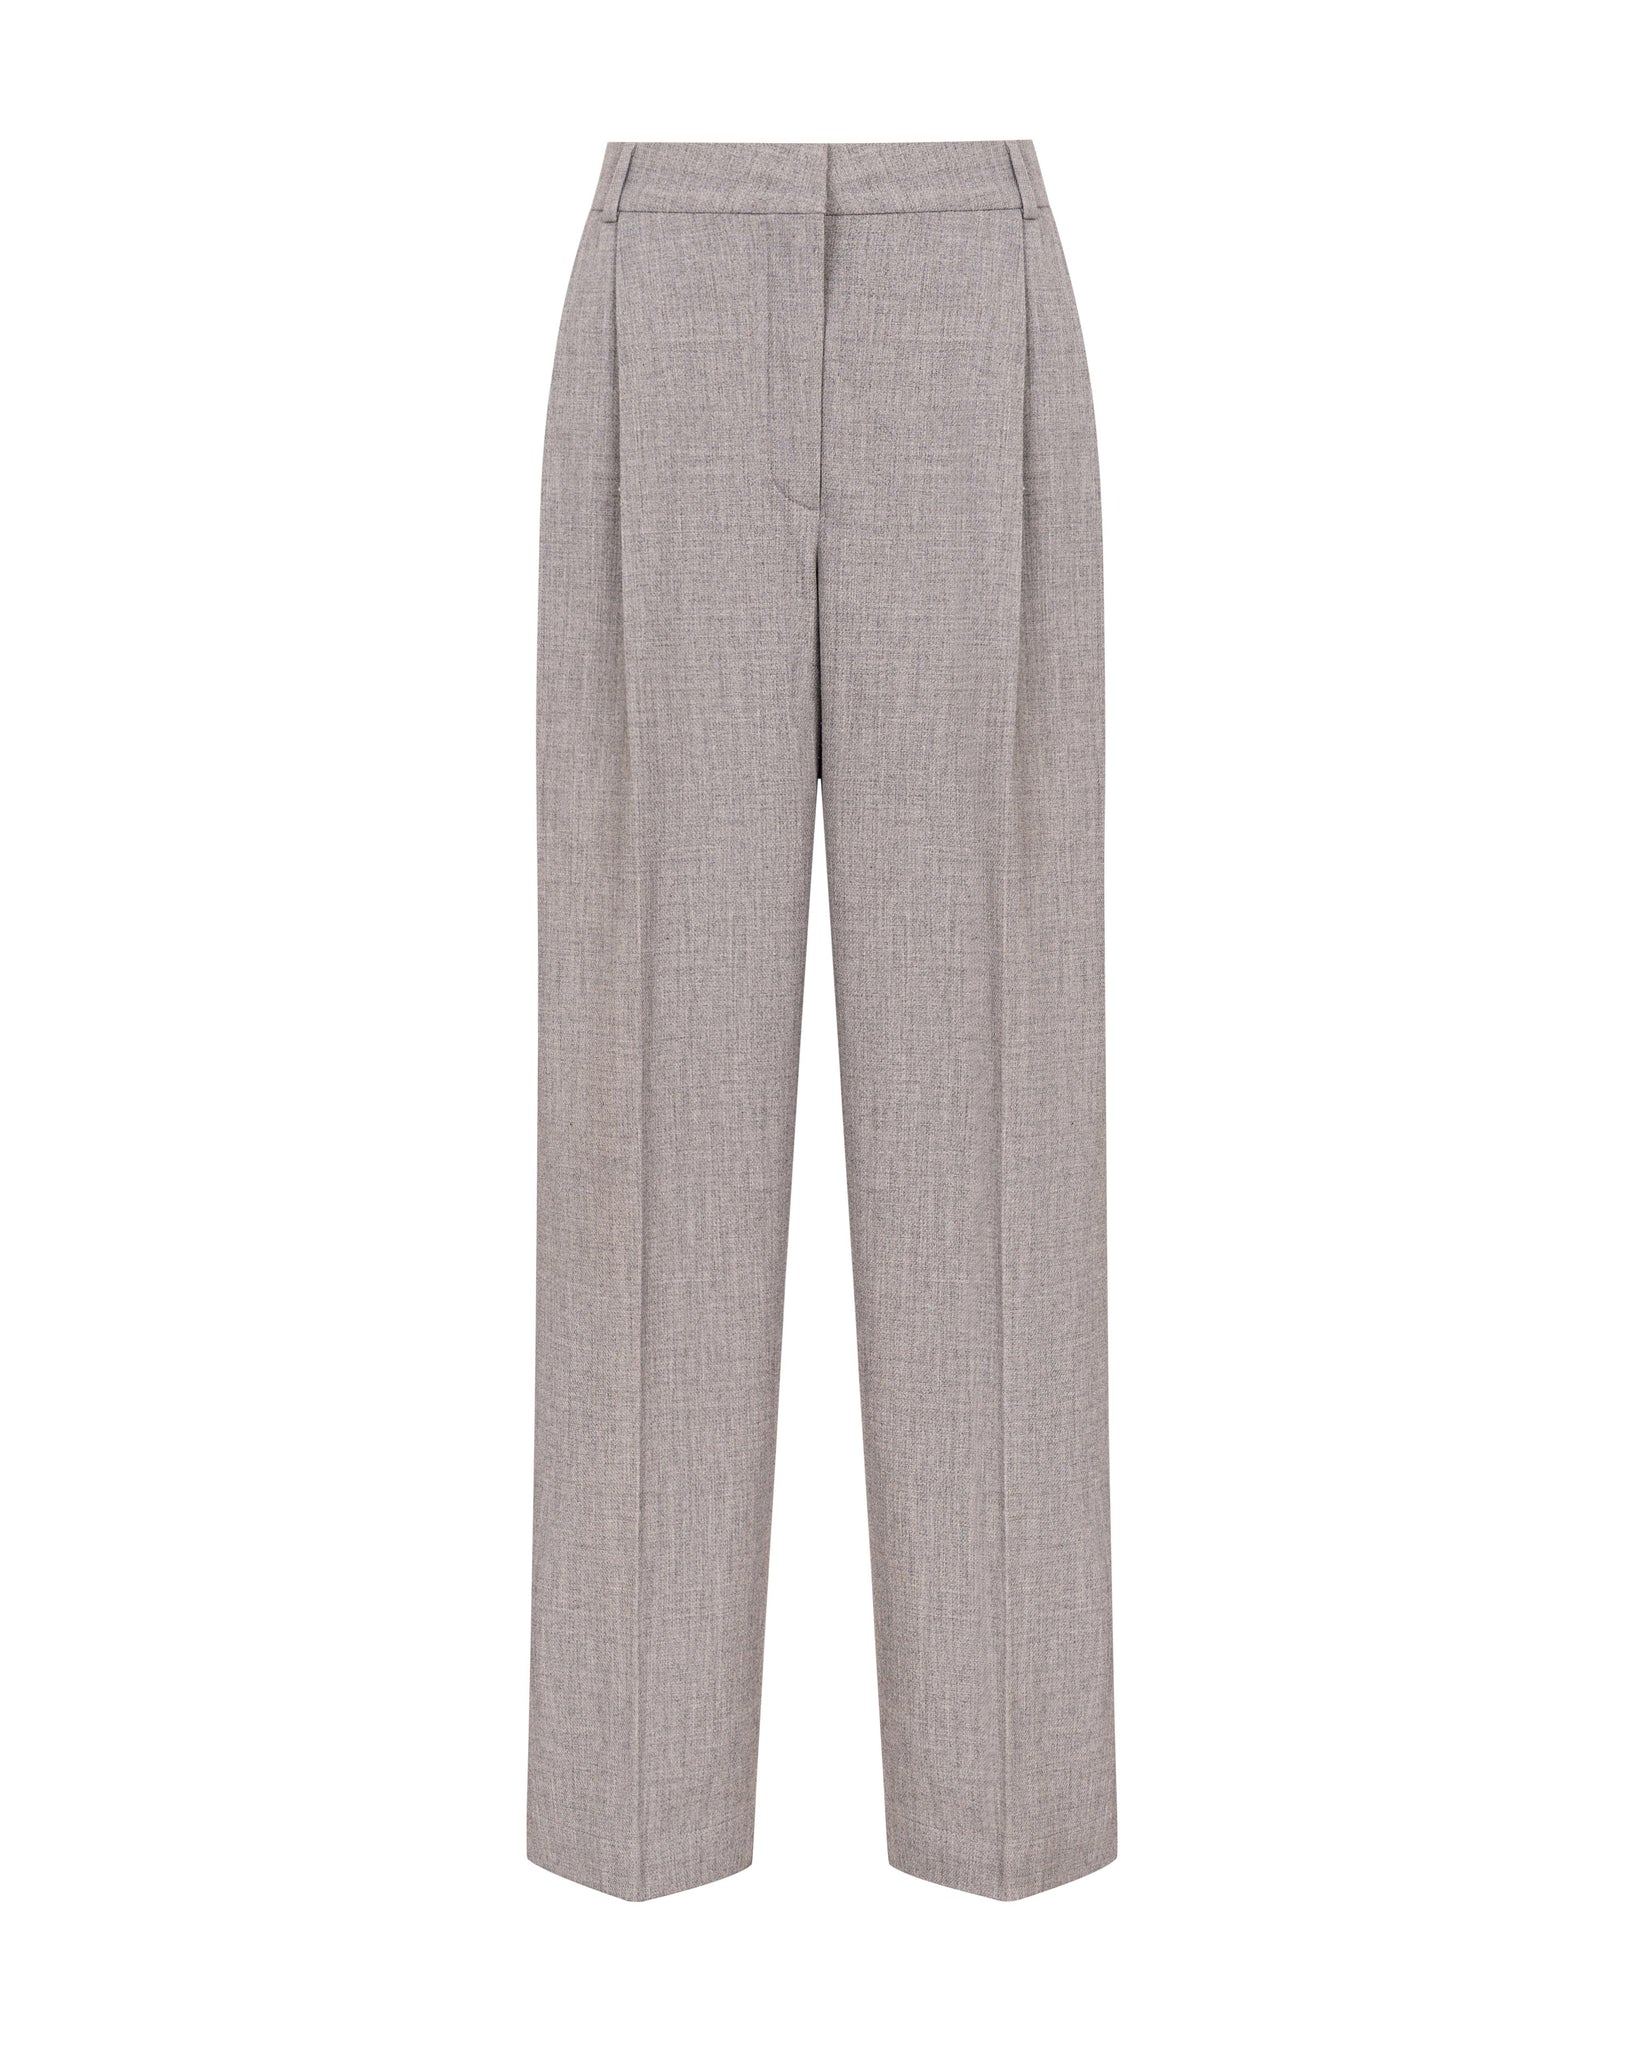 Grey Wide-Leg Tailored Trousers